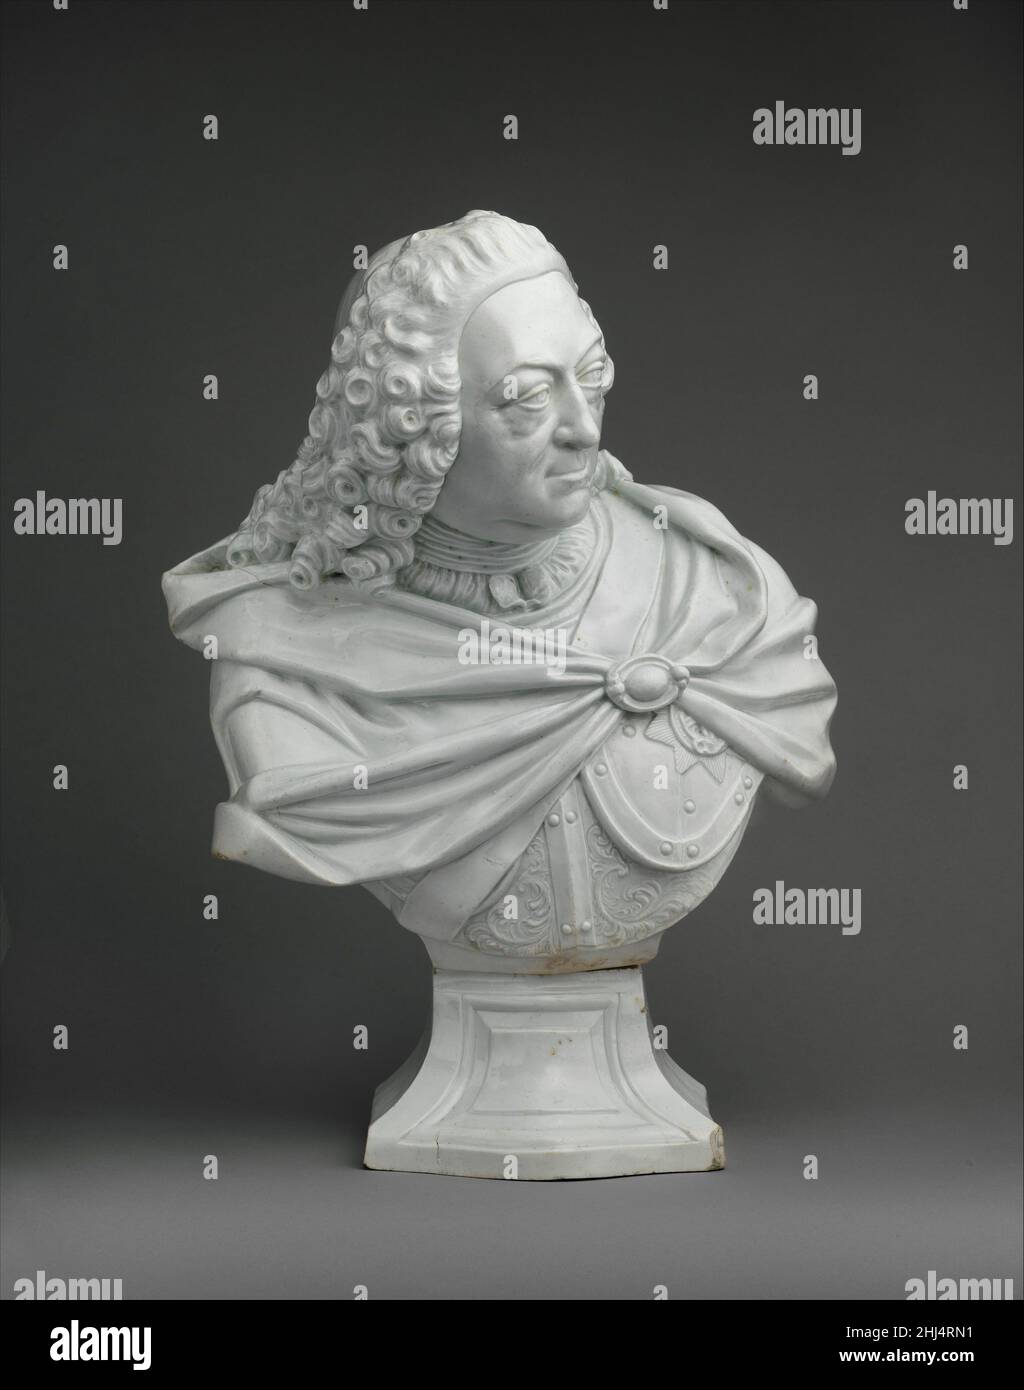 King George II ca. 1760 Vauxhall This large-scale portrait bust